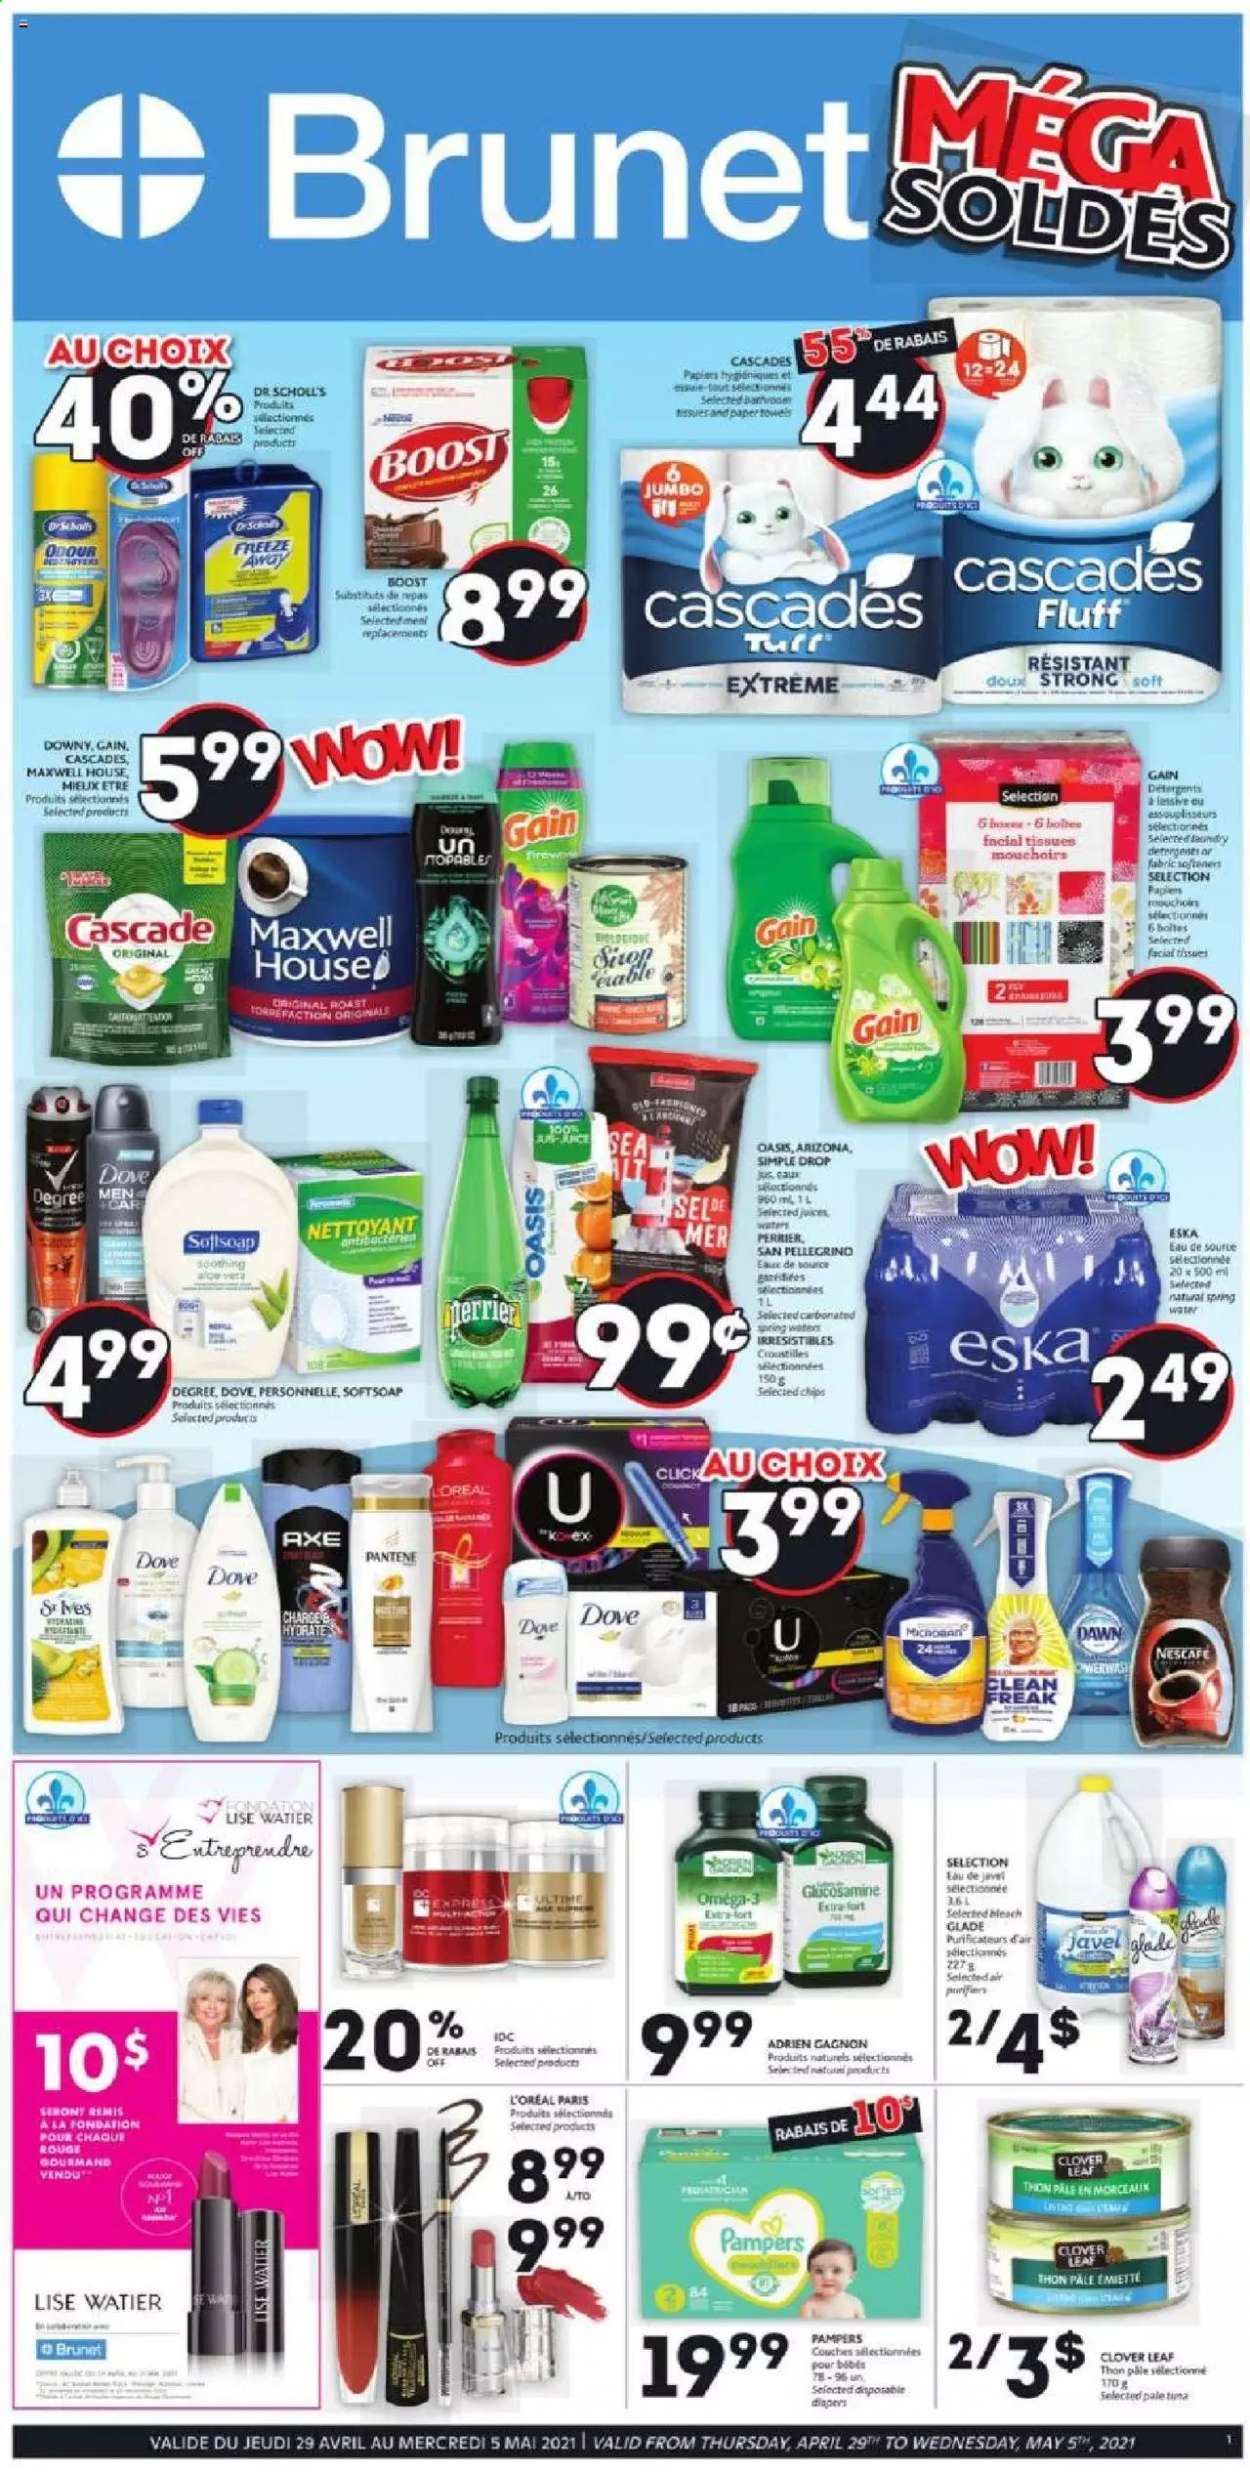 thumbnail - Brunet Flyer - April 29, 2021 - May 05, 2021 - Sales products - nappies, tissues, Gain, bleach, Cascade, Softsoap, facial tissues, L’Oréal, glucosamine, Omega-3, Dr. Scholl's, Pampers, Pantene, Nescafé. Page 1.